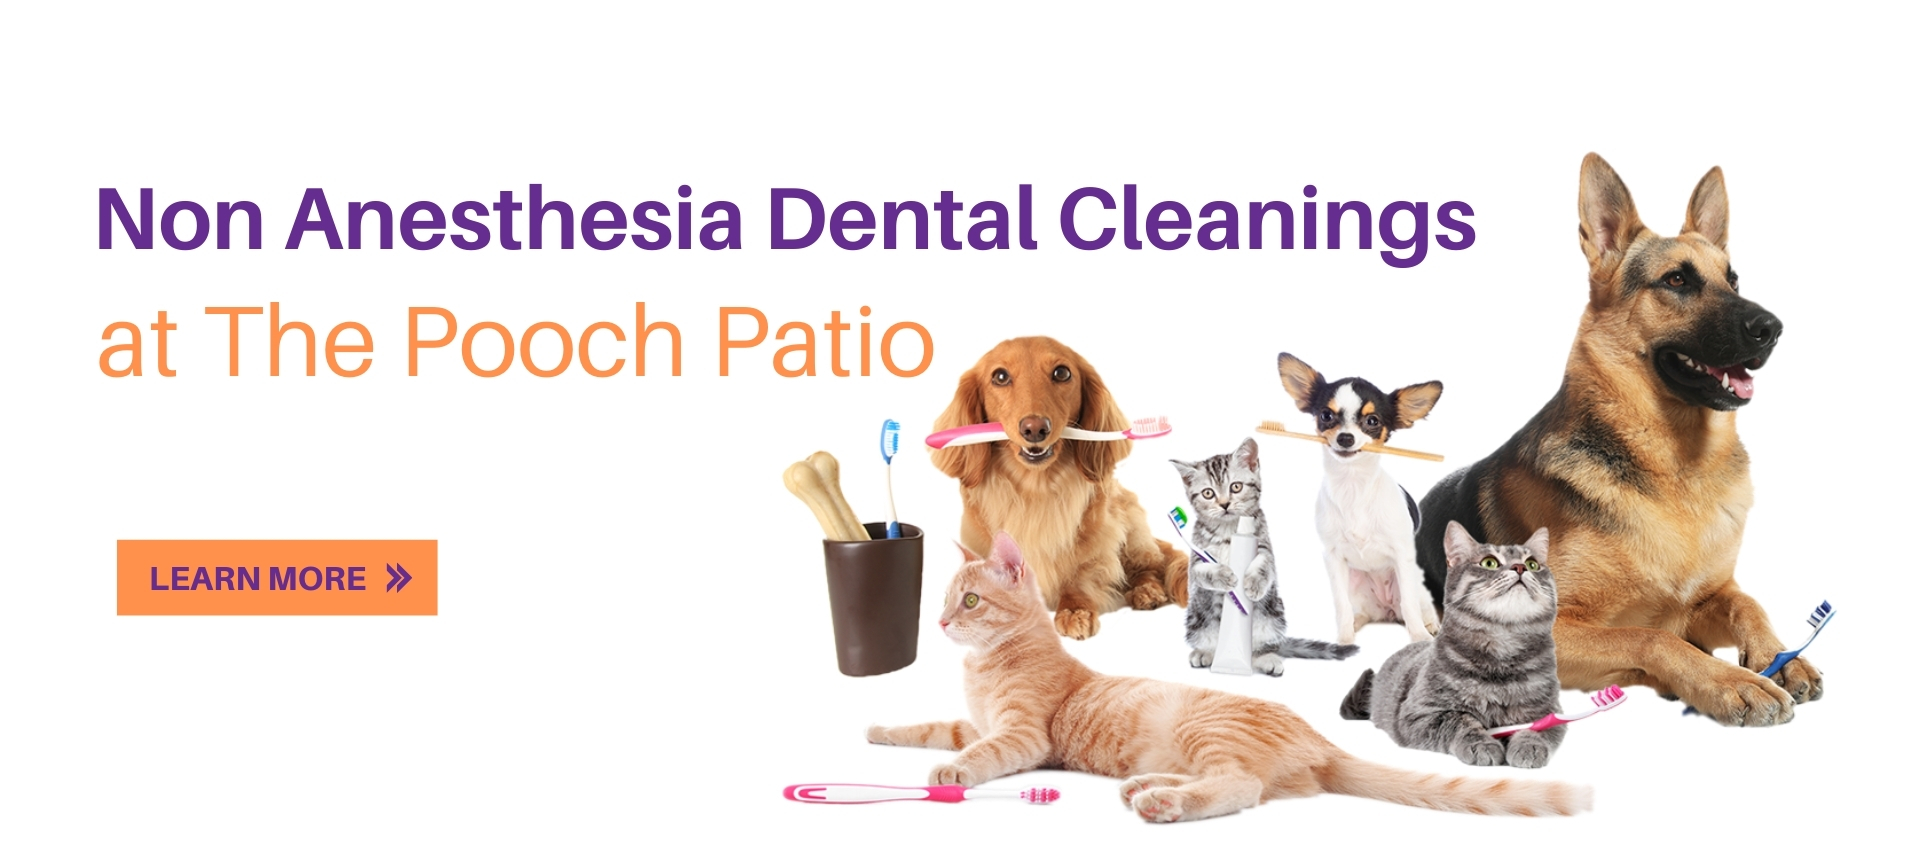 Non-Anesthesia Dental Cleanings